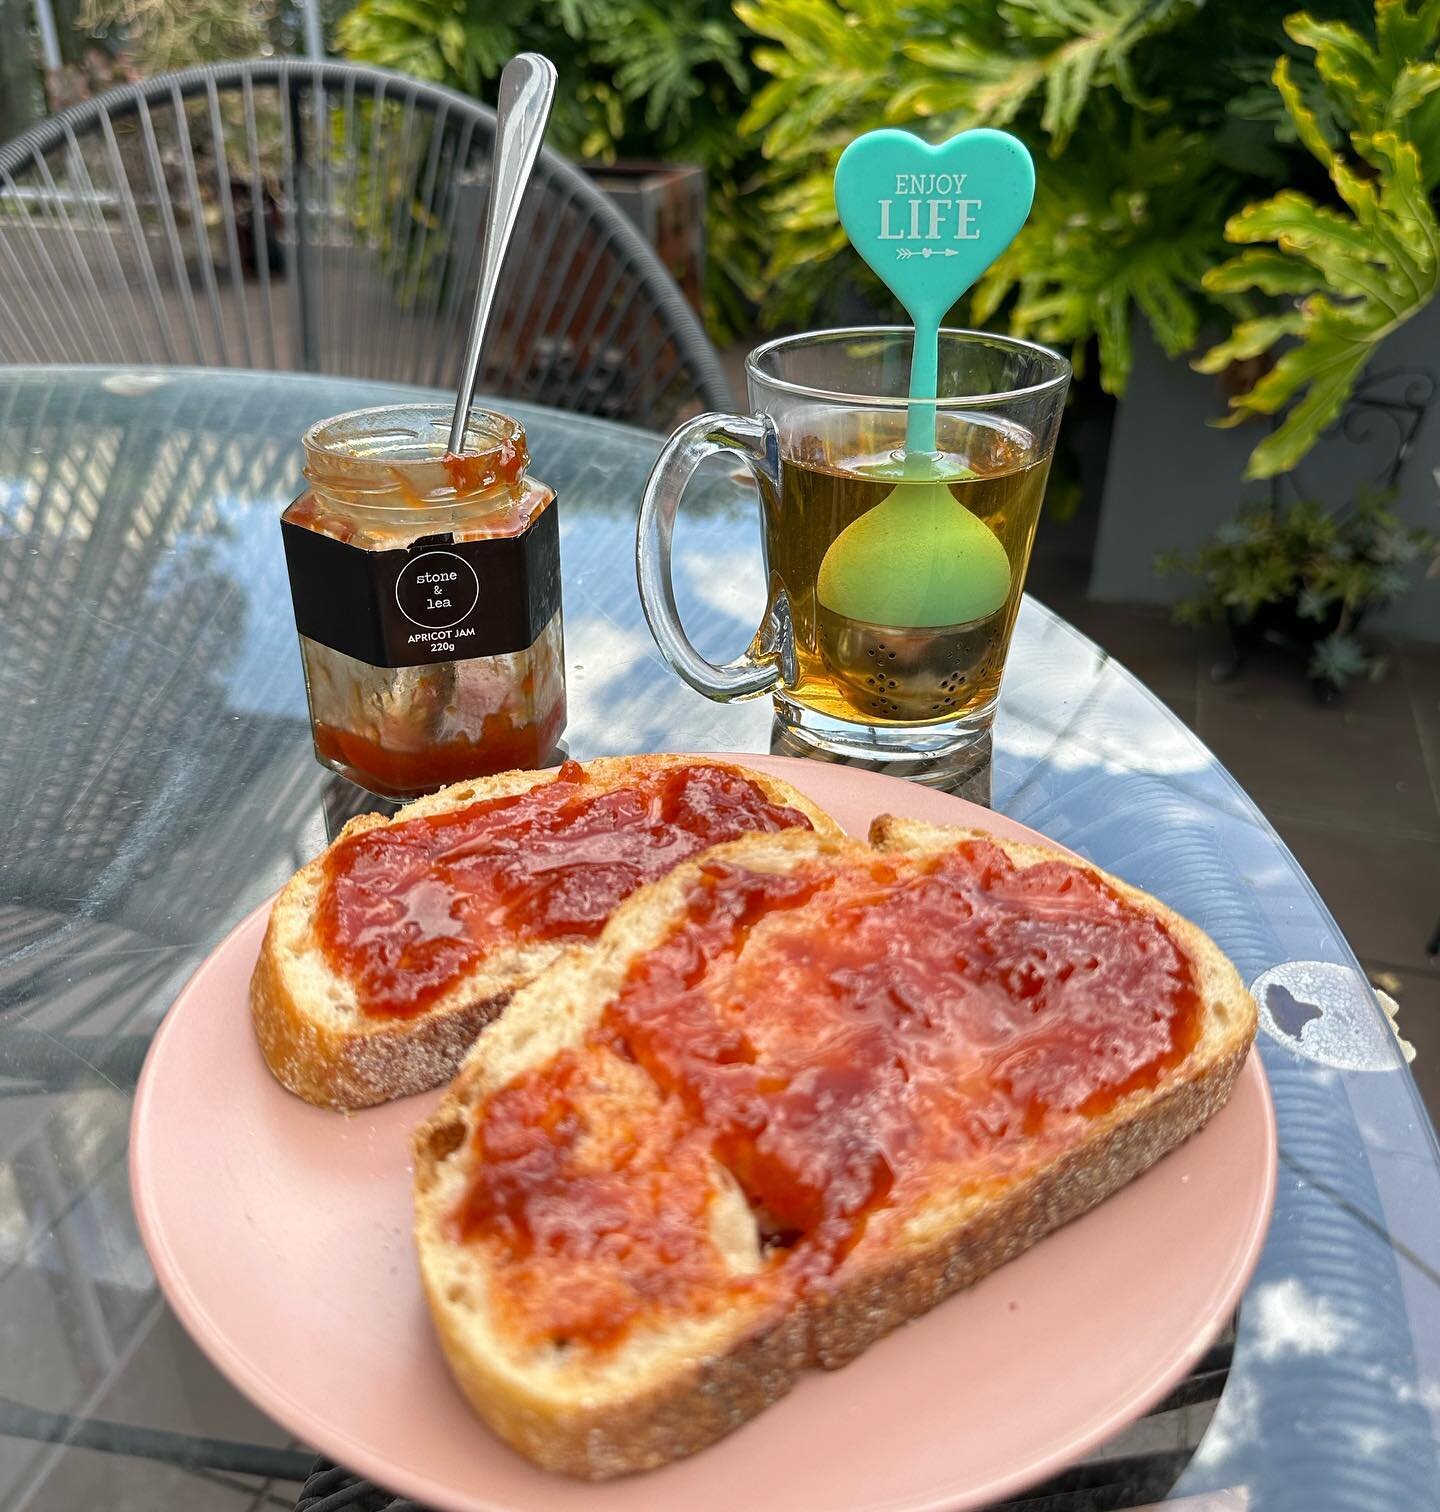 Arvo delights 🙌🏼 green tea with Apricot Jam on toast! 

SHOP: http://bit.ly/StoneandLea-ApricotJam